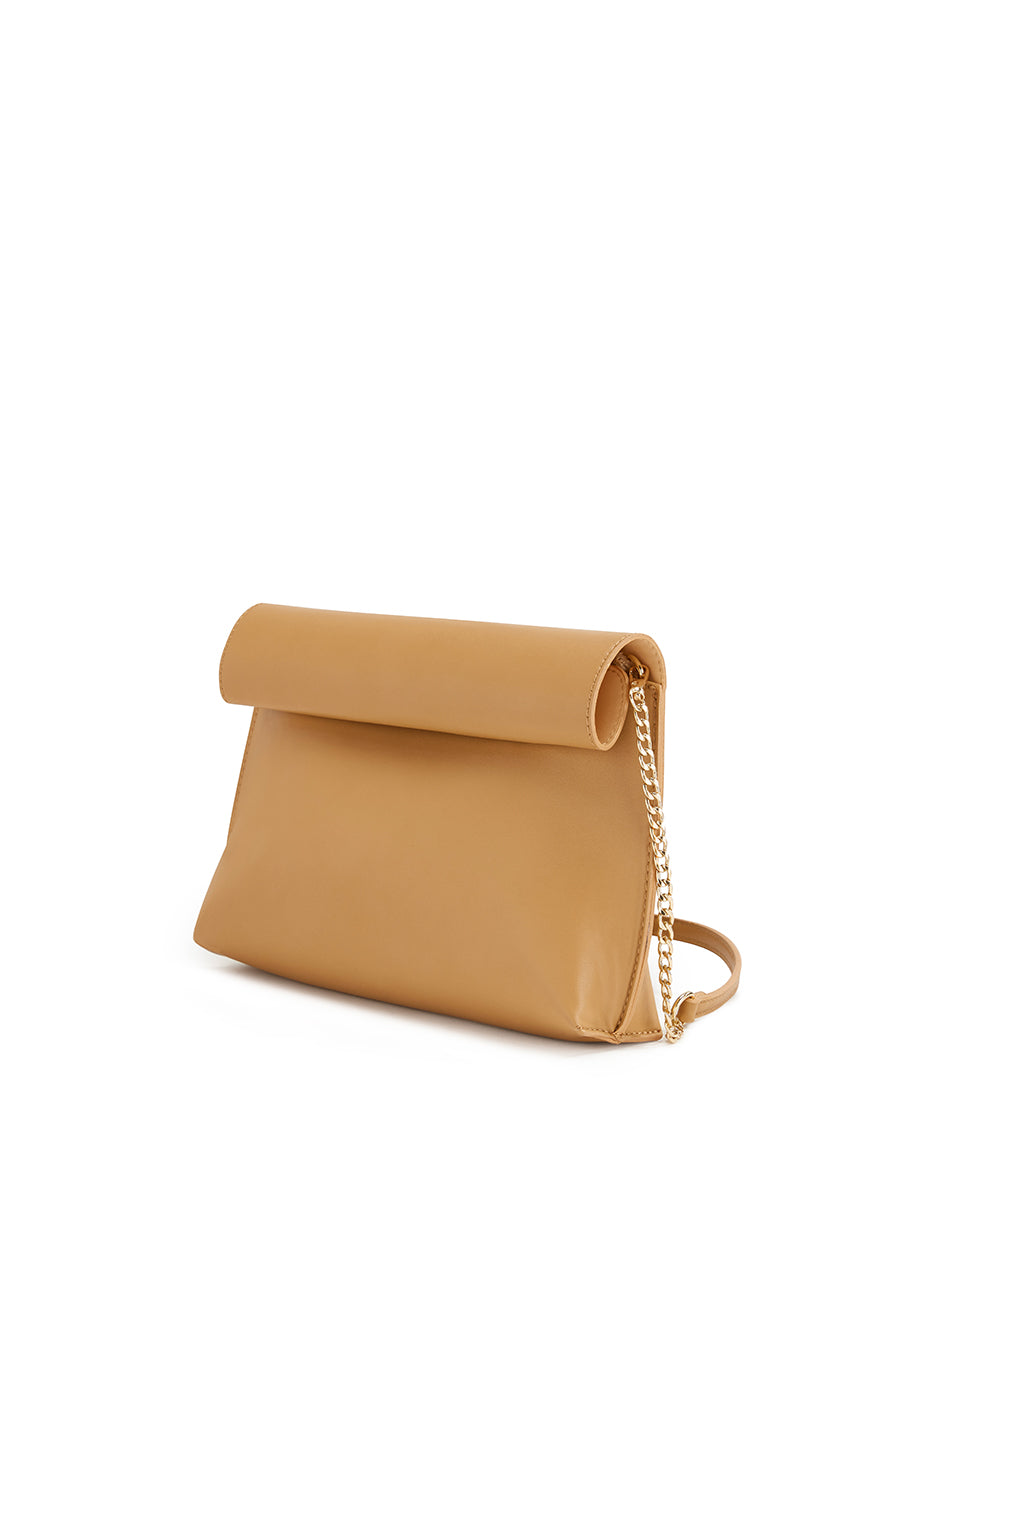 Smooth Roll Reversible Clutch - Street Level